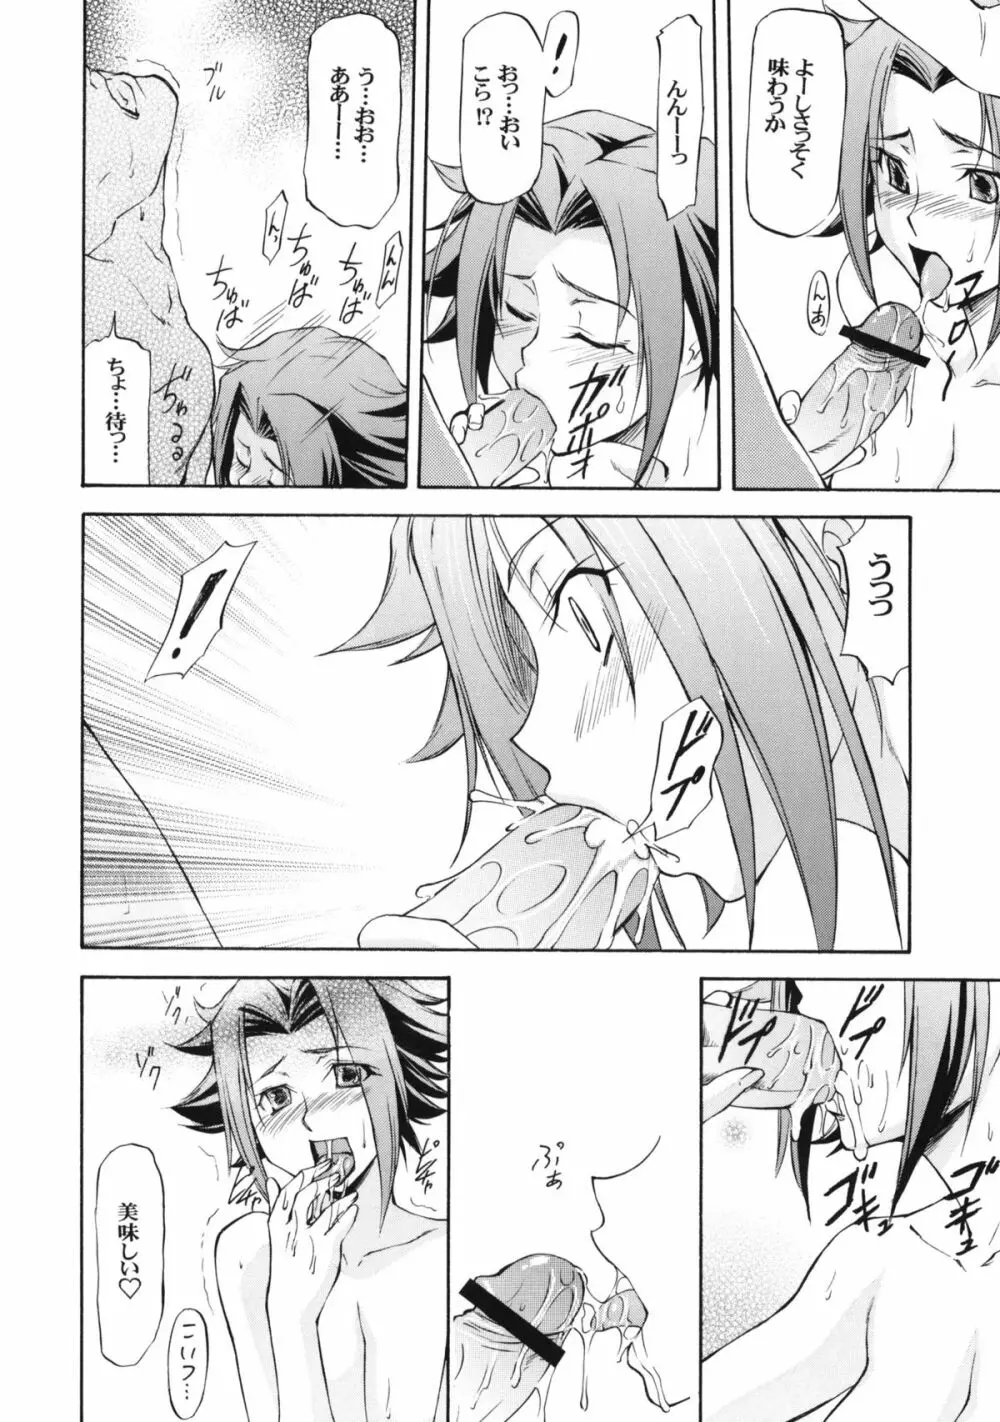 LeLeぱっぱ Vol.16 Re;Re; - page27